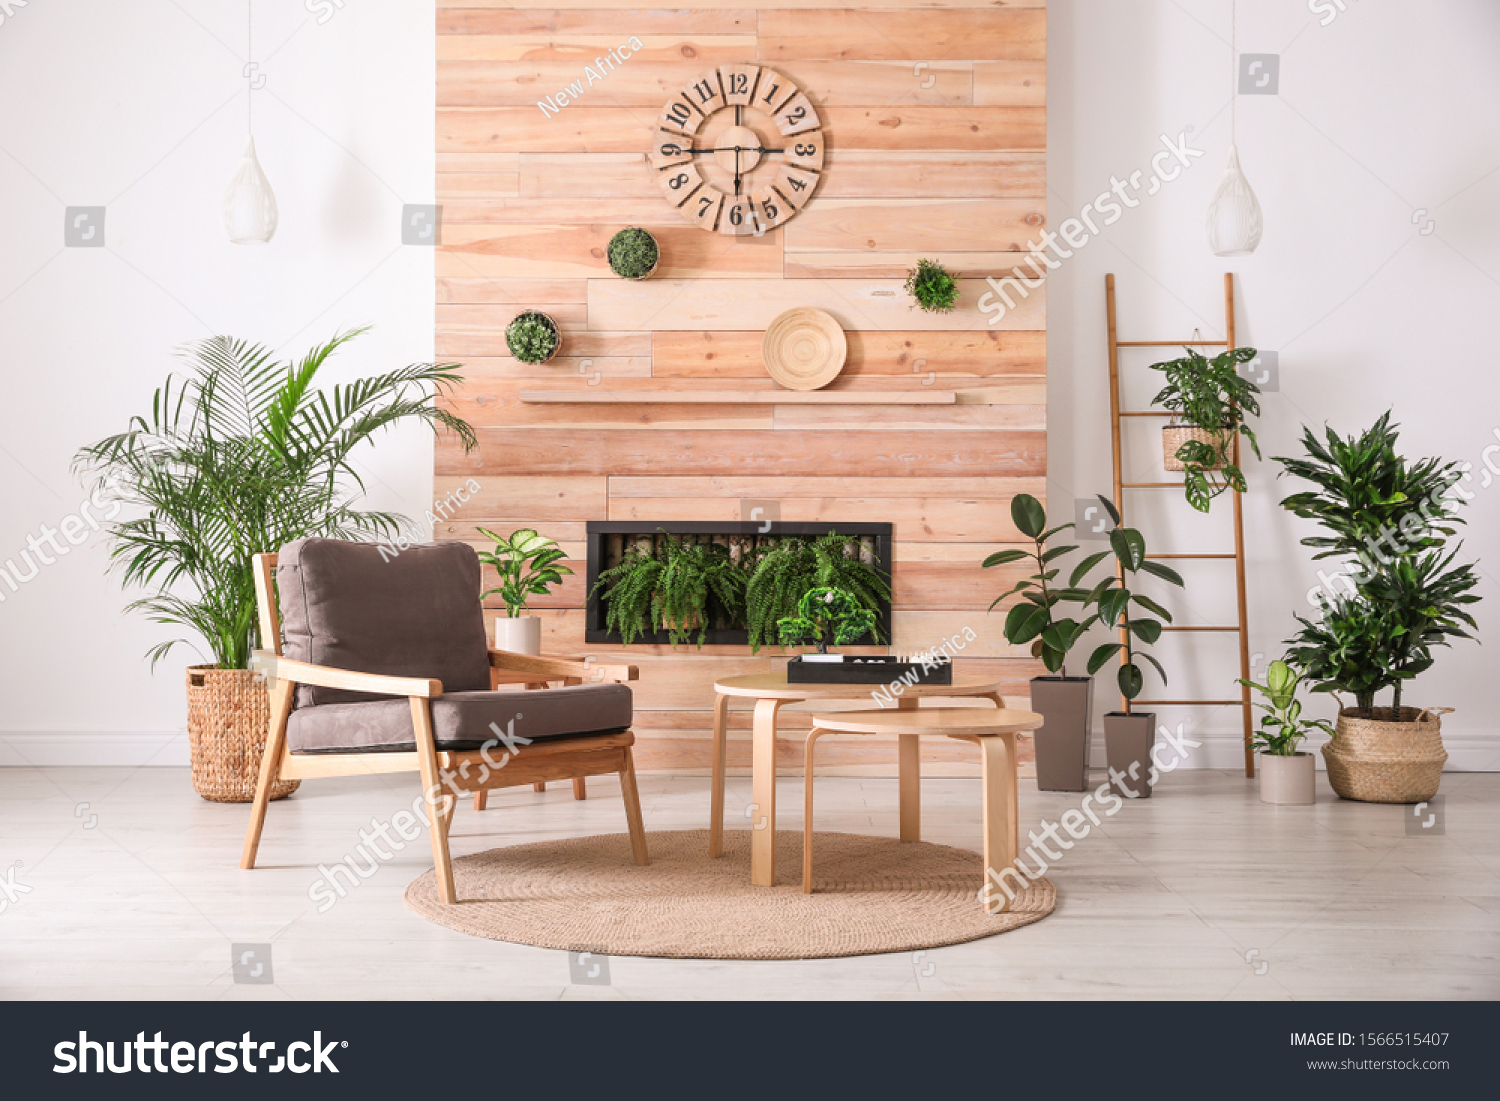 Stylish living room interior with armchair, green plants and miniature zen garden. Home design ideas #1566515407